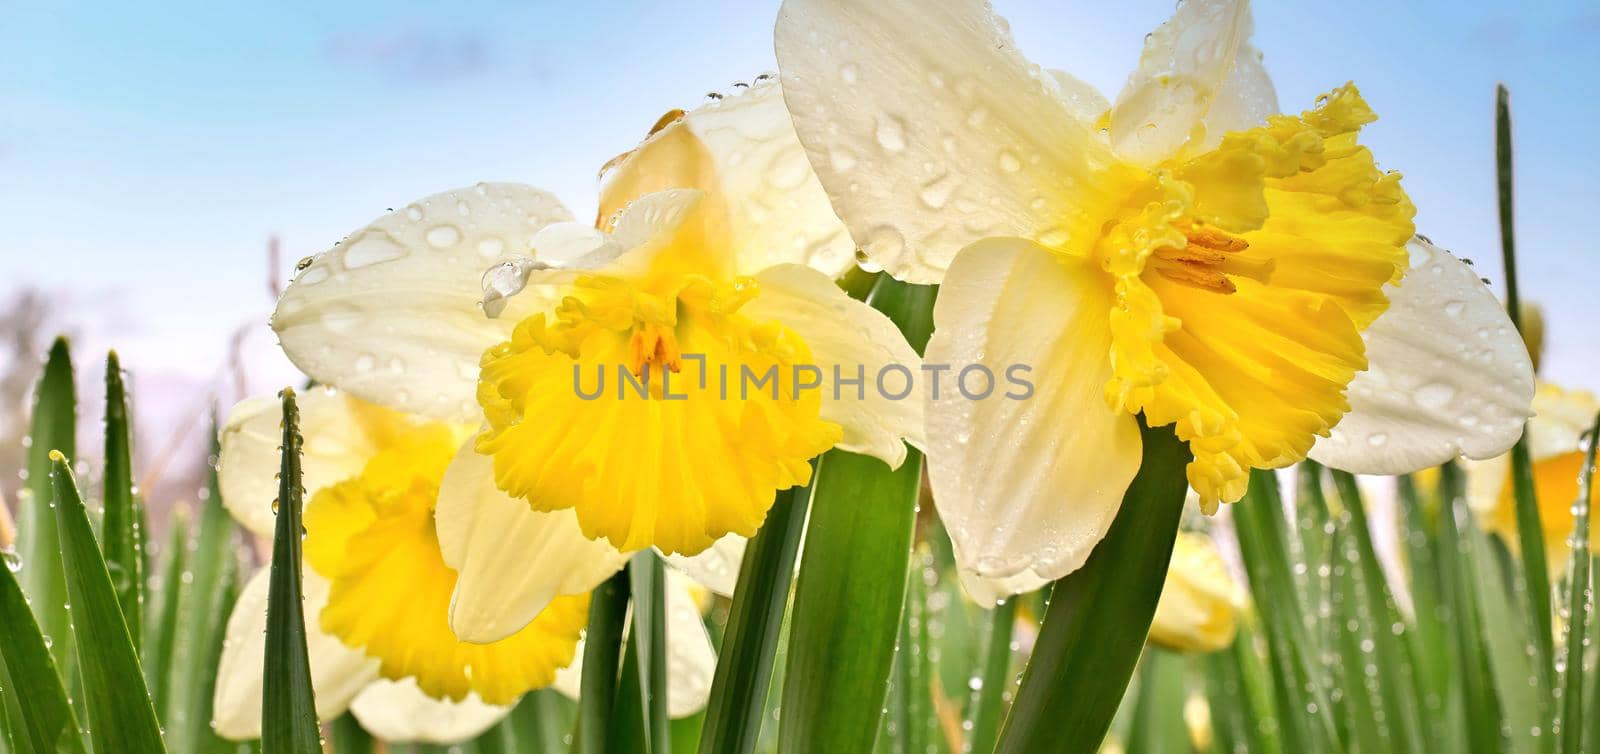 Ice Follies Daffodils Narcissus Macro Closeup. Flowers are Resplendent with Fresh Raindrops after a Spring Rain in Garden against a colorful blue sky. Banner panorama perfect as border for Easter, Mother's Day, spring, and more.